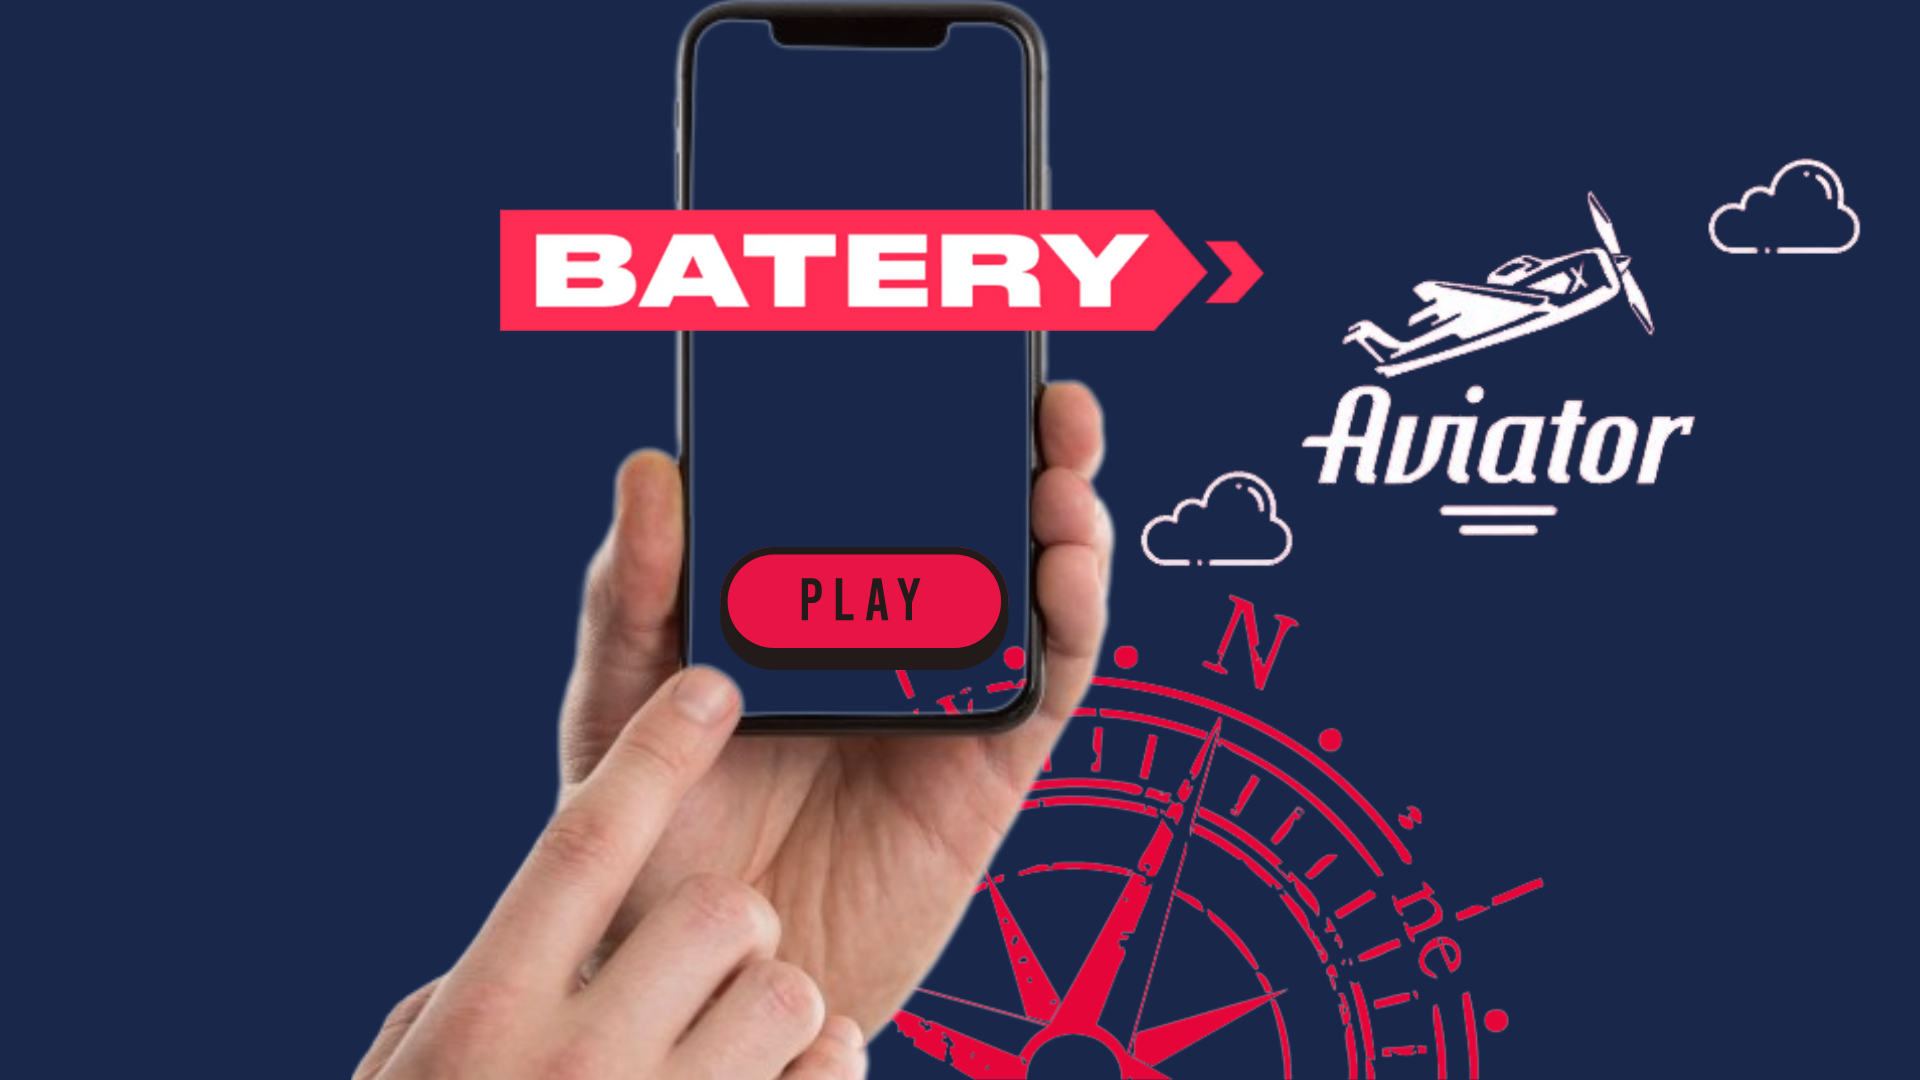 Logos of the Aviator game and Batery casino, and a hand holding smartphone